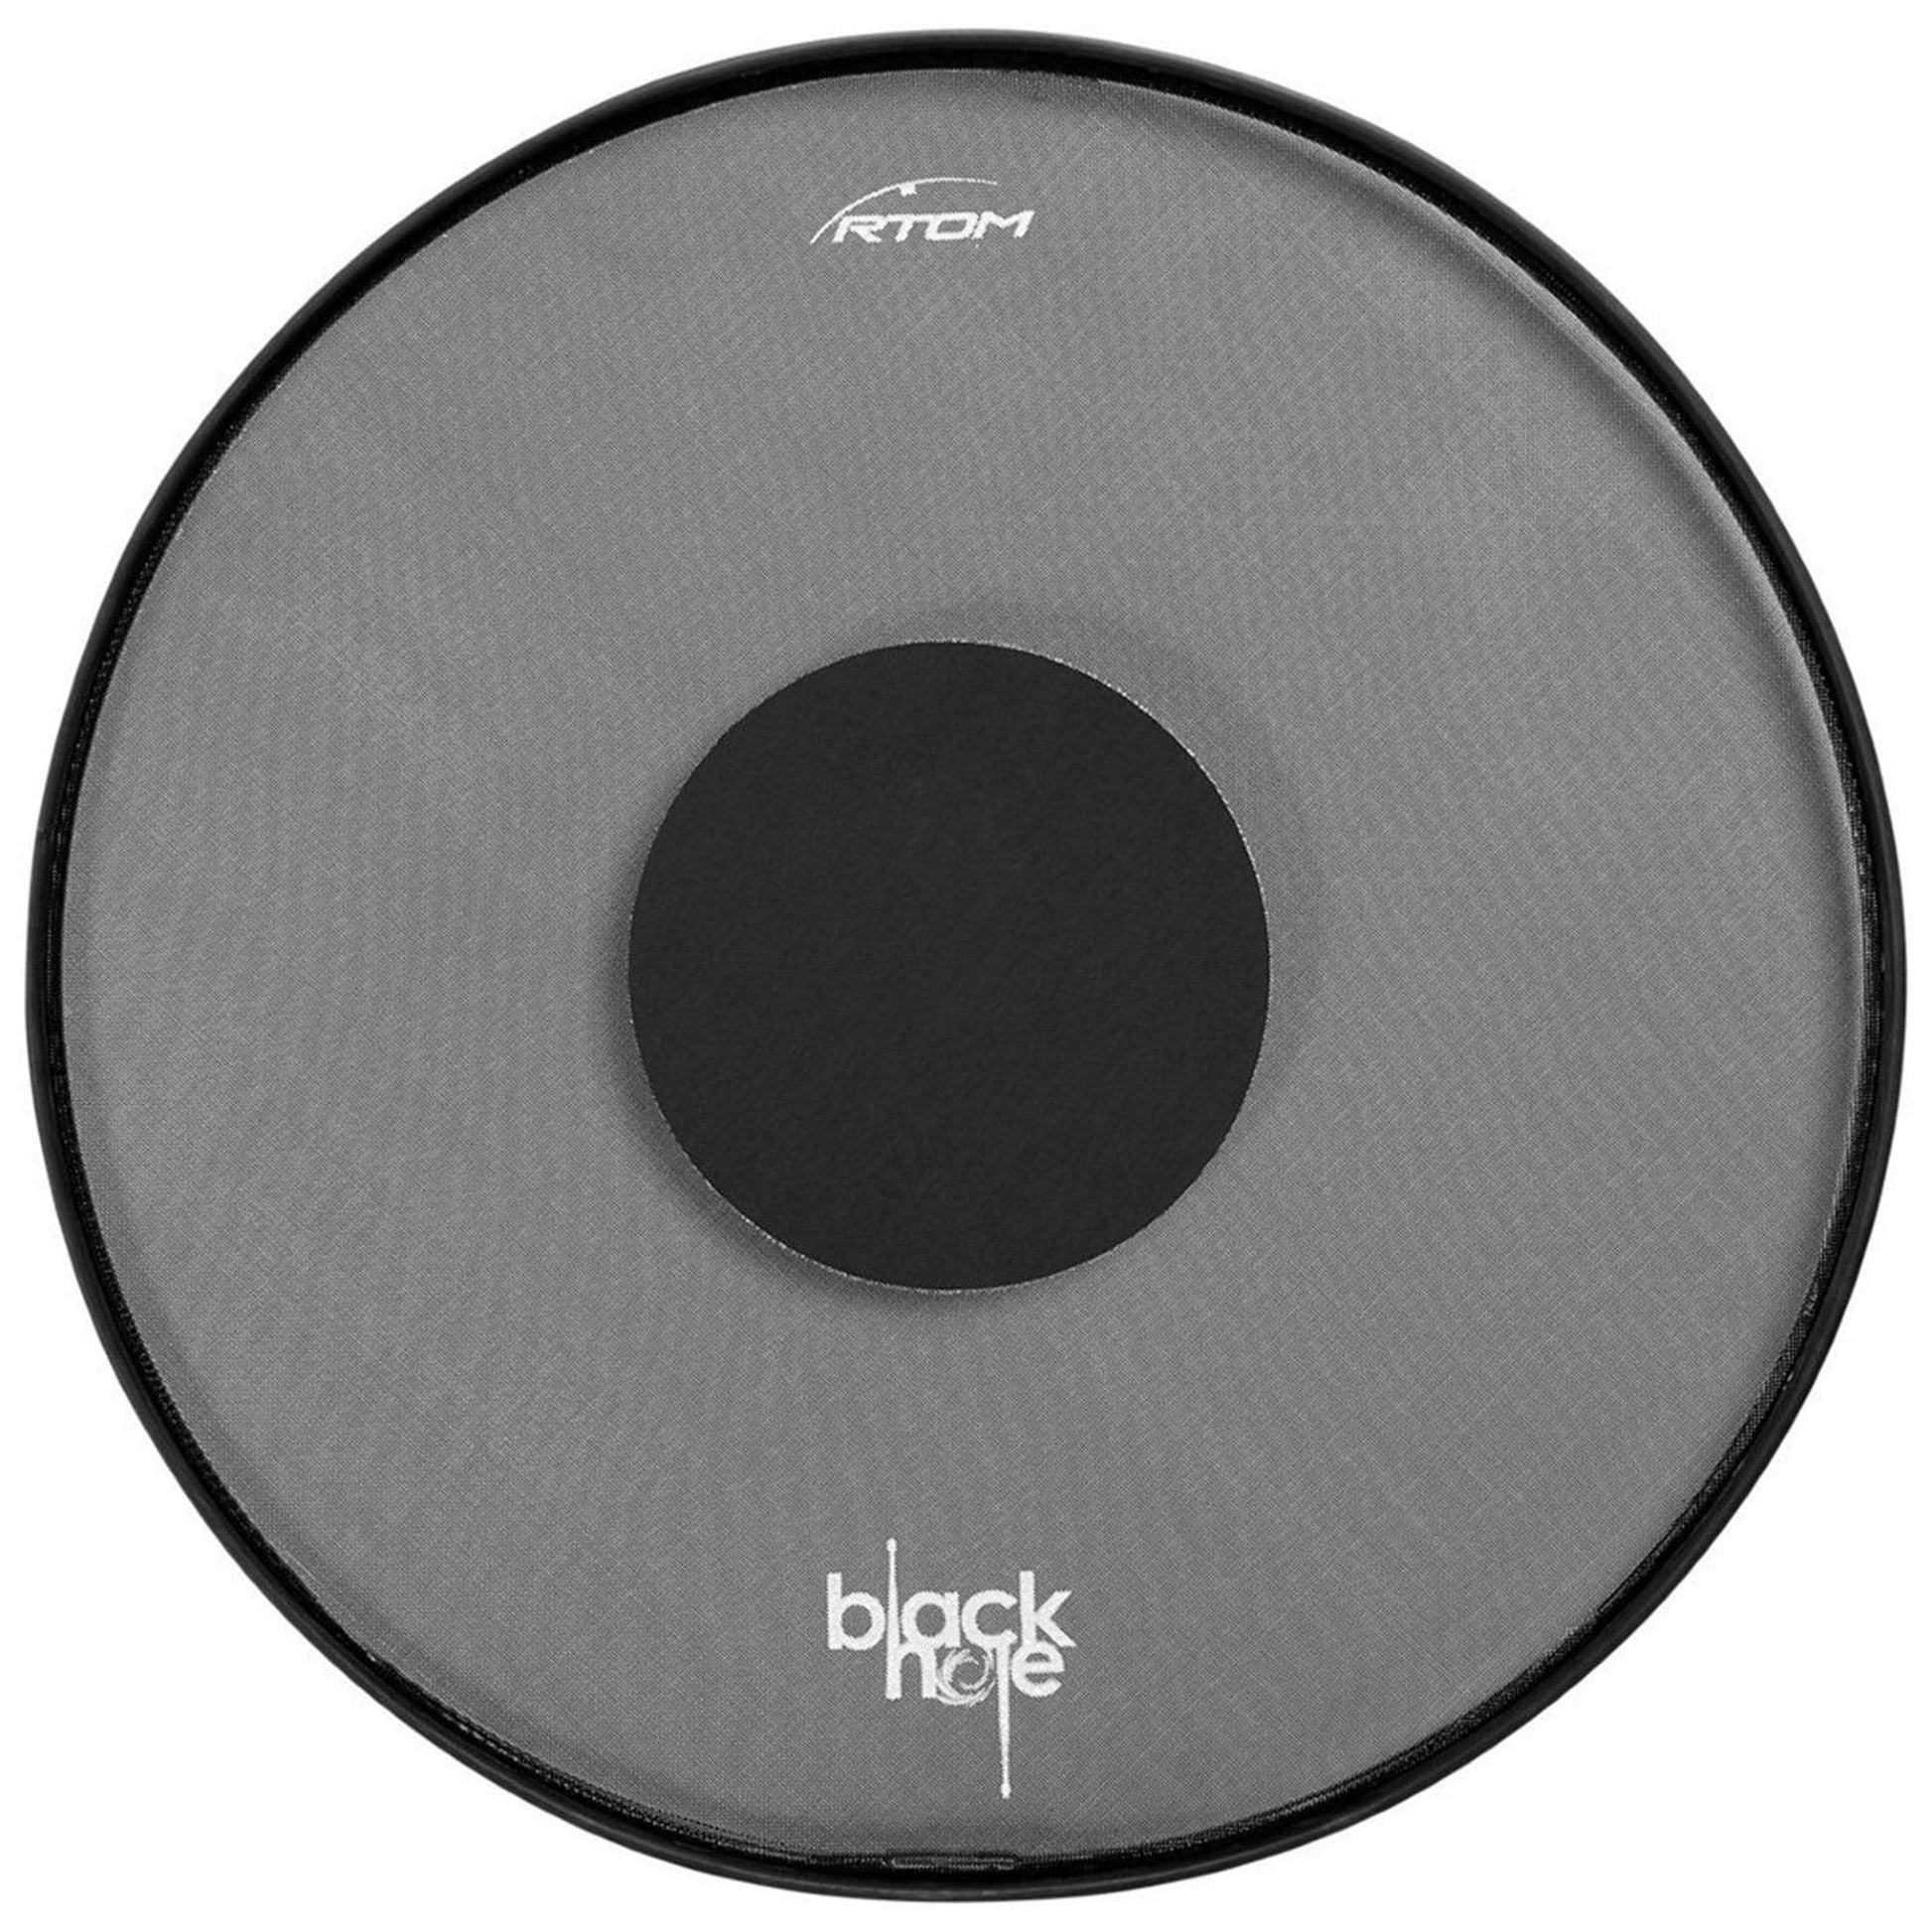 RTOM 10/12/14/16/22” Black Hole Practice Pad Set Drums and Percussion